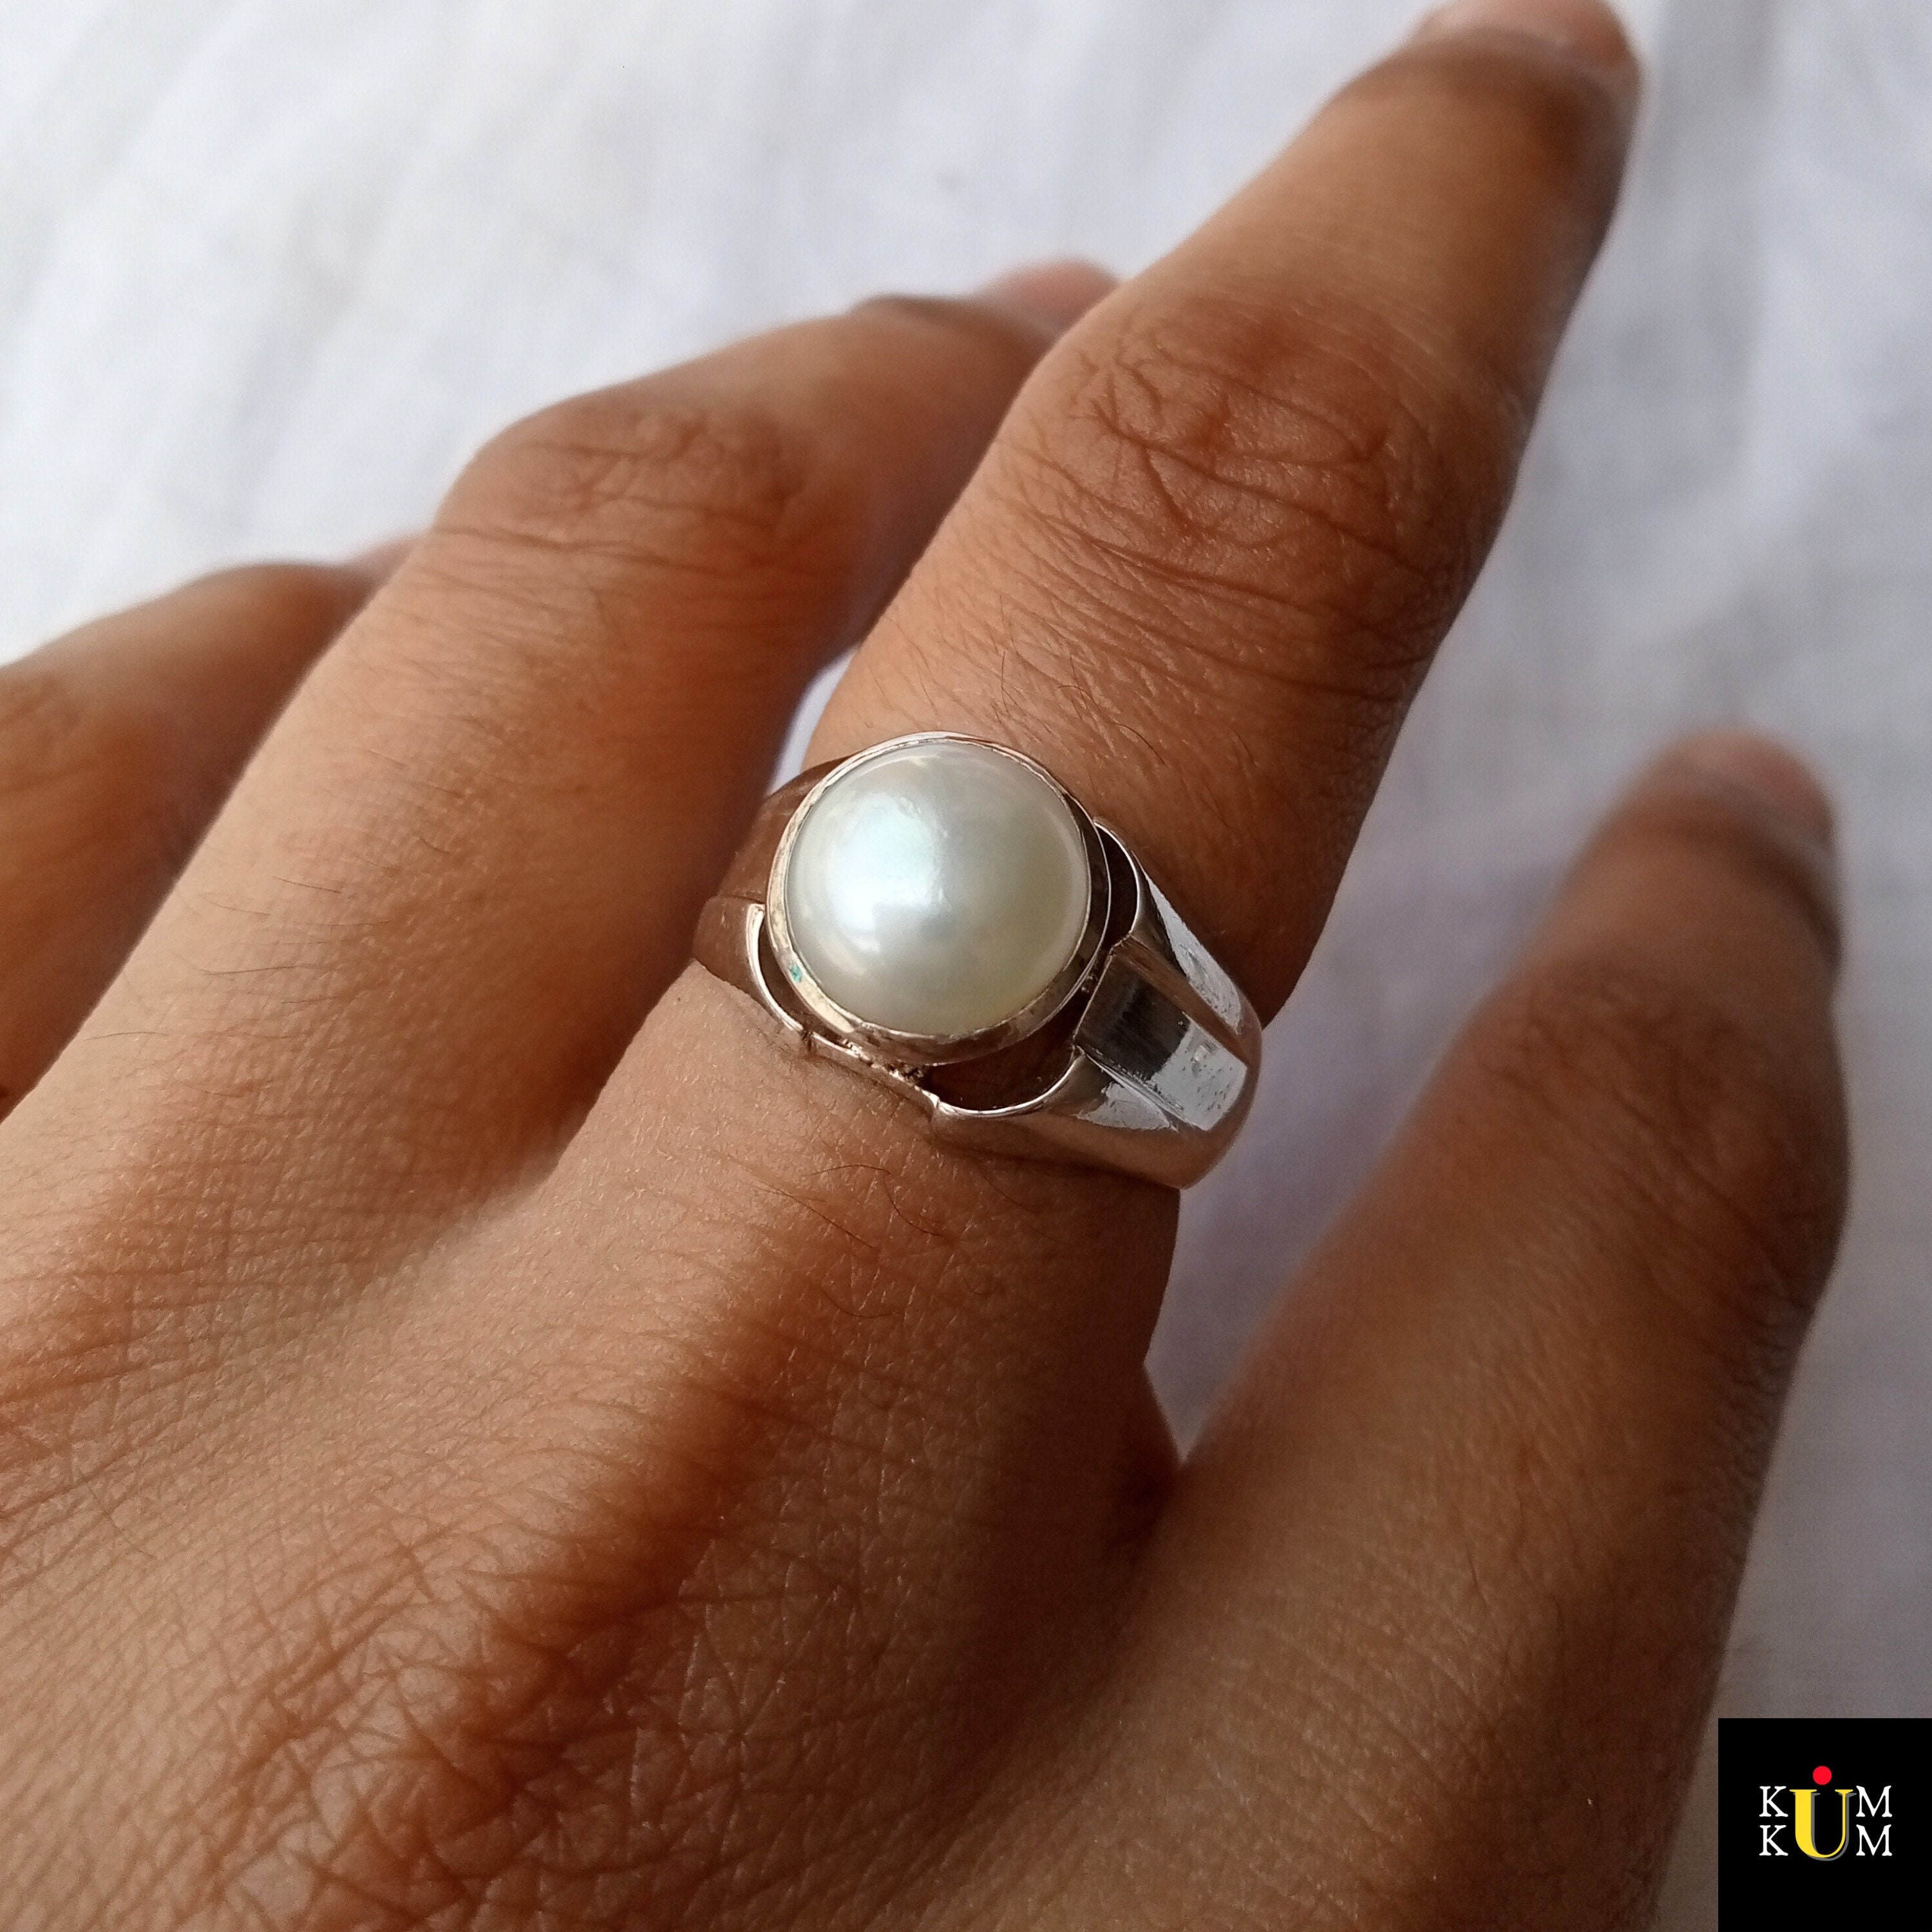 Amazon.com: Natural Pearl Ring, Silver Pearl Ring, Sterling Silver Ring,  Handcrafted Pearl Ring, Birthstone Ring, Statement Ring, Wedding Ring,  Jewelry (11.5) : Handmade Products